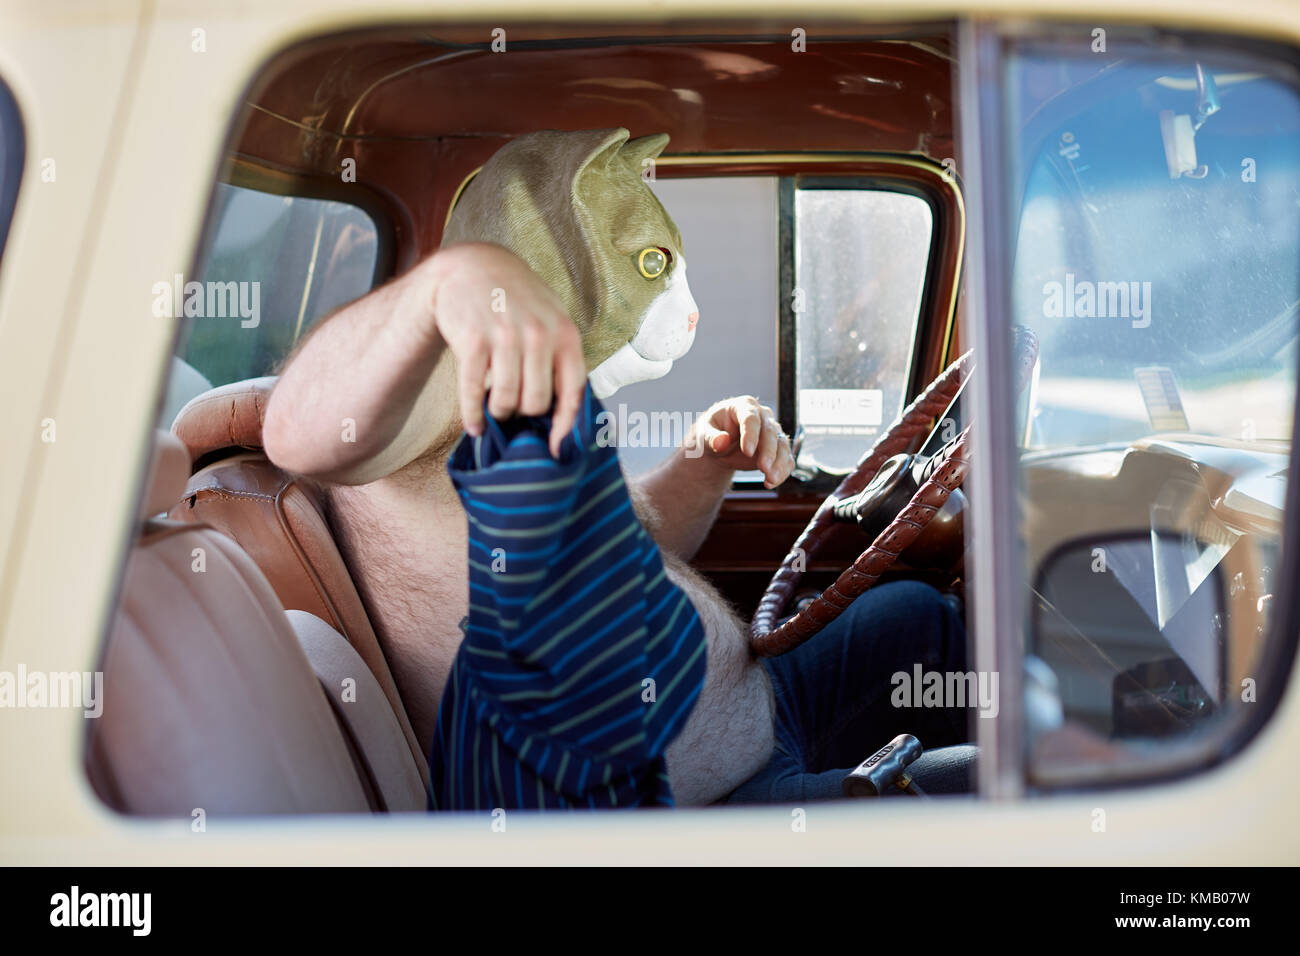 Hot overweight man in a cat mask sitting in a vehicle behind the steering wheel taking off his T-shirt and waving it in his hand Stock Photo